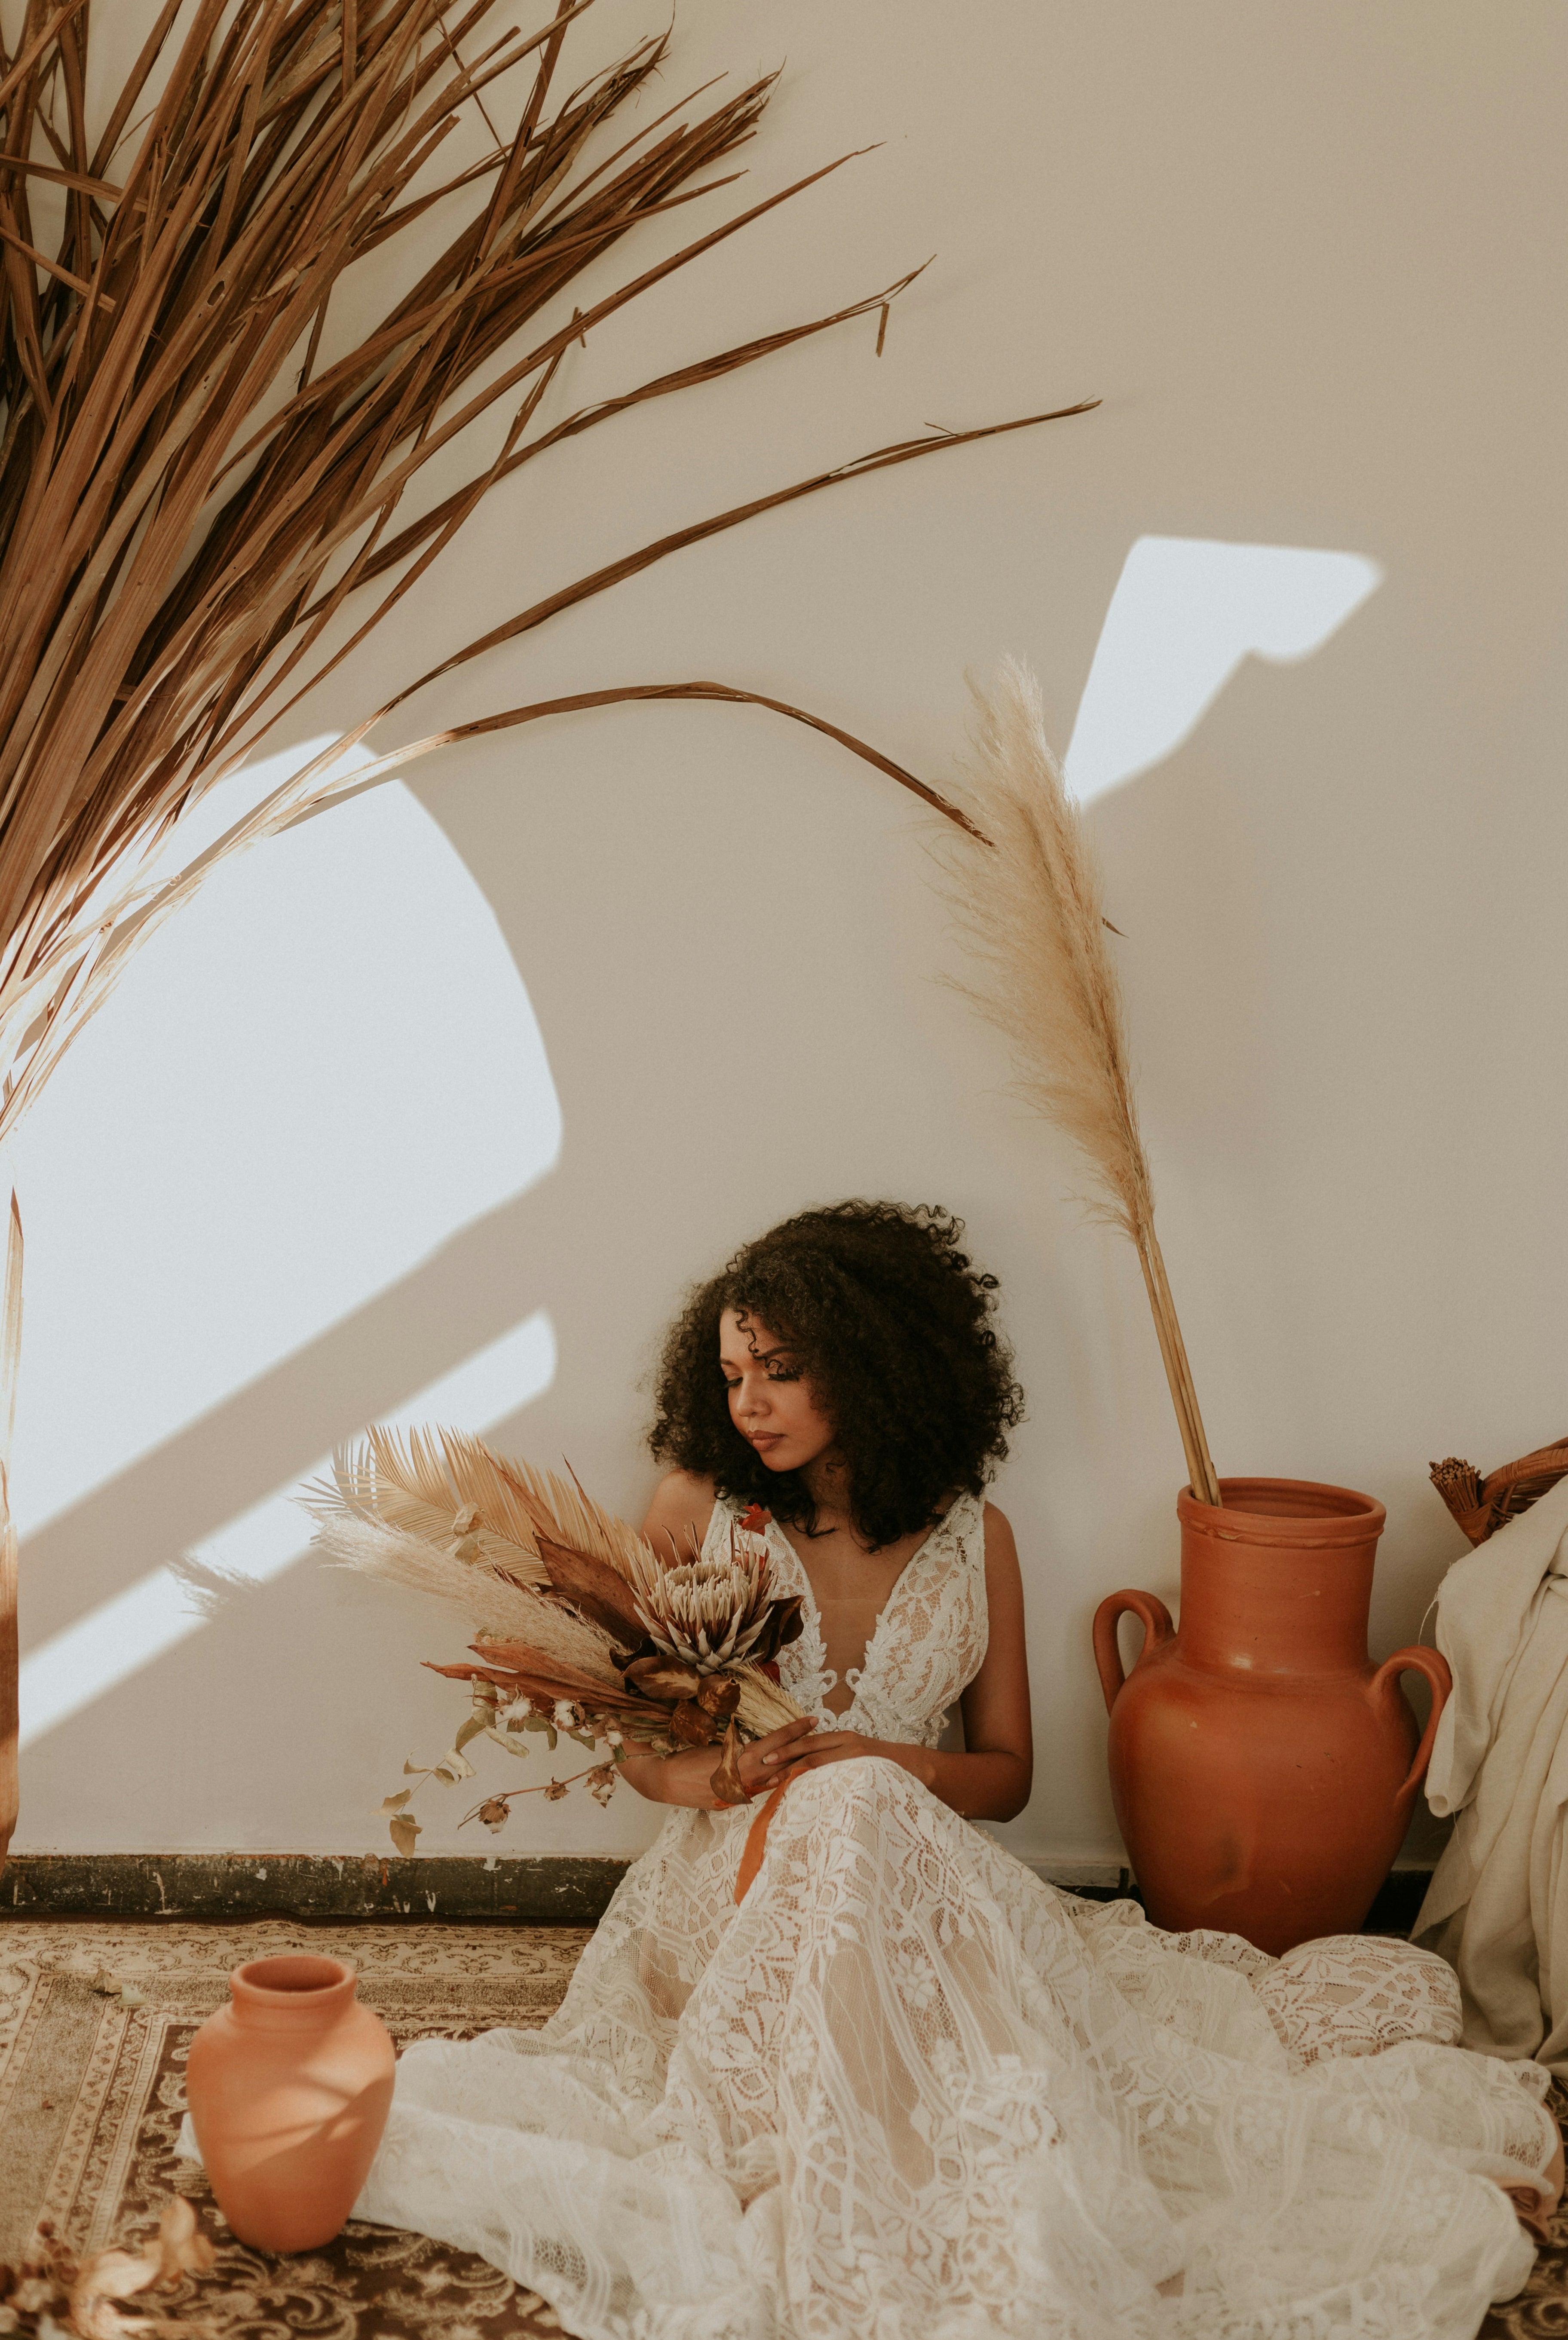 Bohemian Wedding: How to Dress for the Perfect Boho-Chic Ceremony